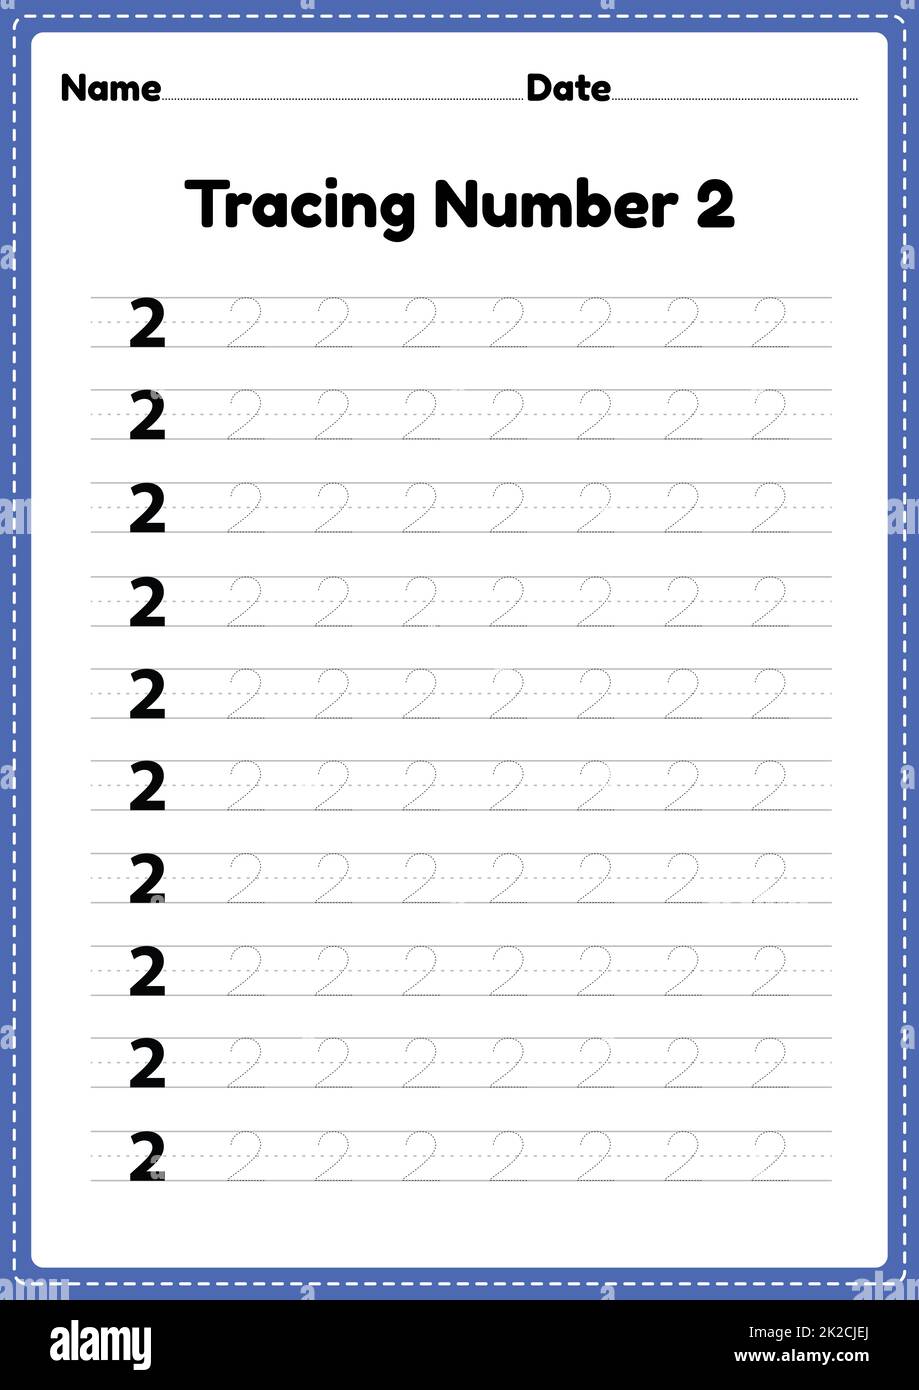 Tracing number 2 worksheet for kindergarten and preschool kids for educational handwriting practice in a printable page. Stock Photo